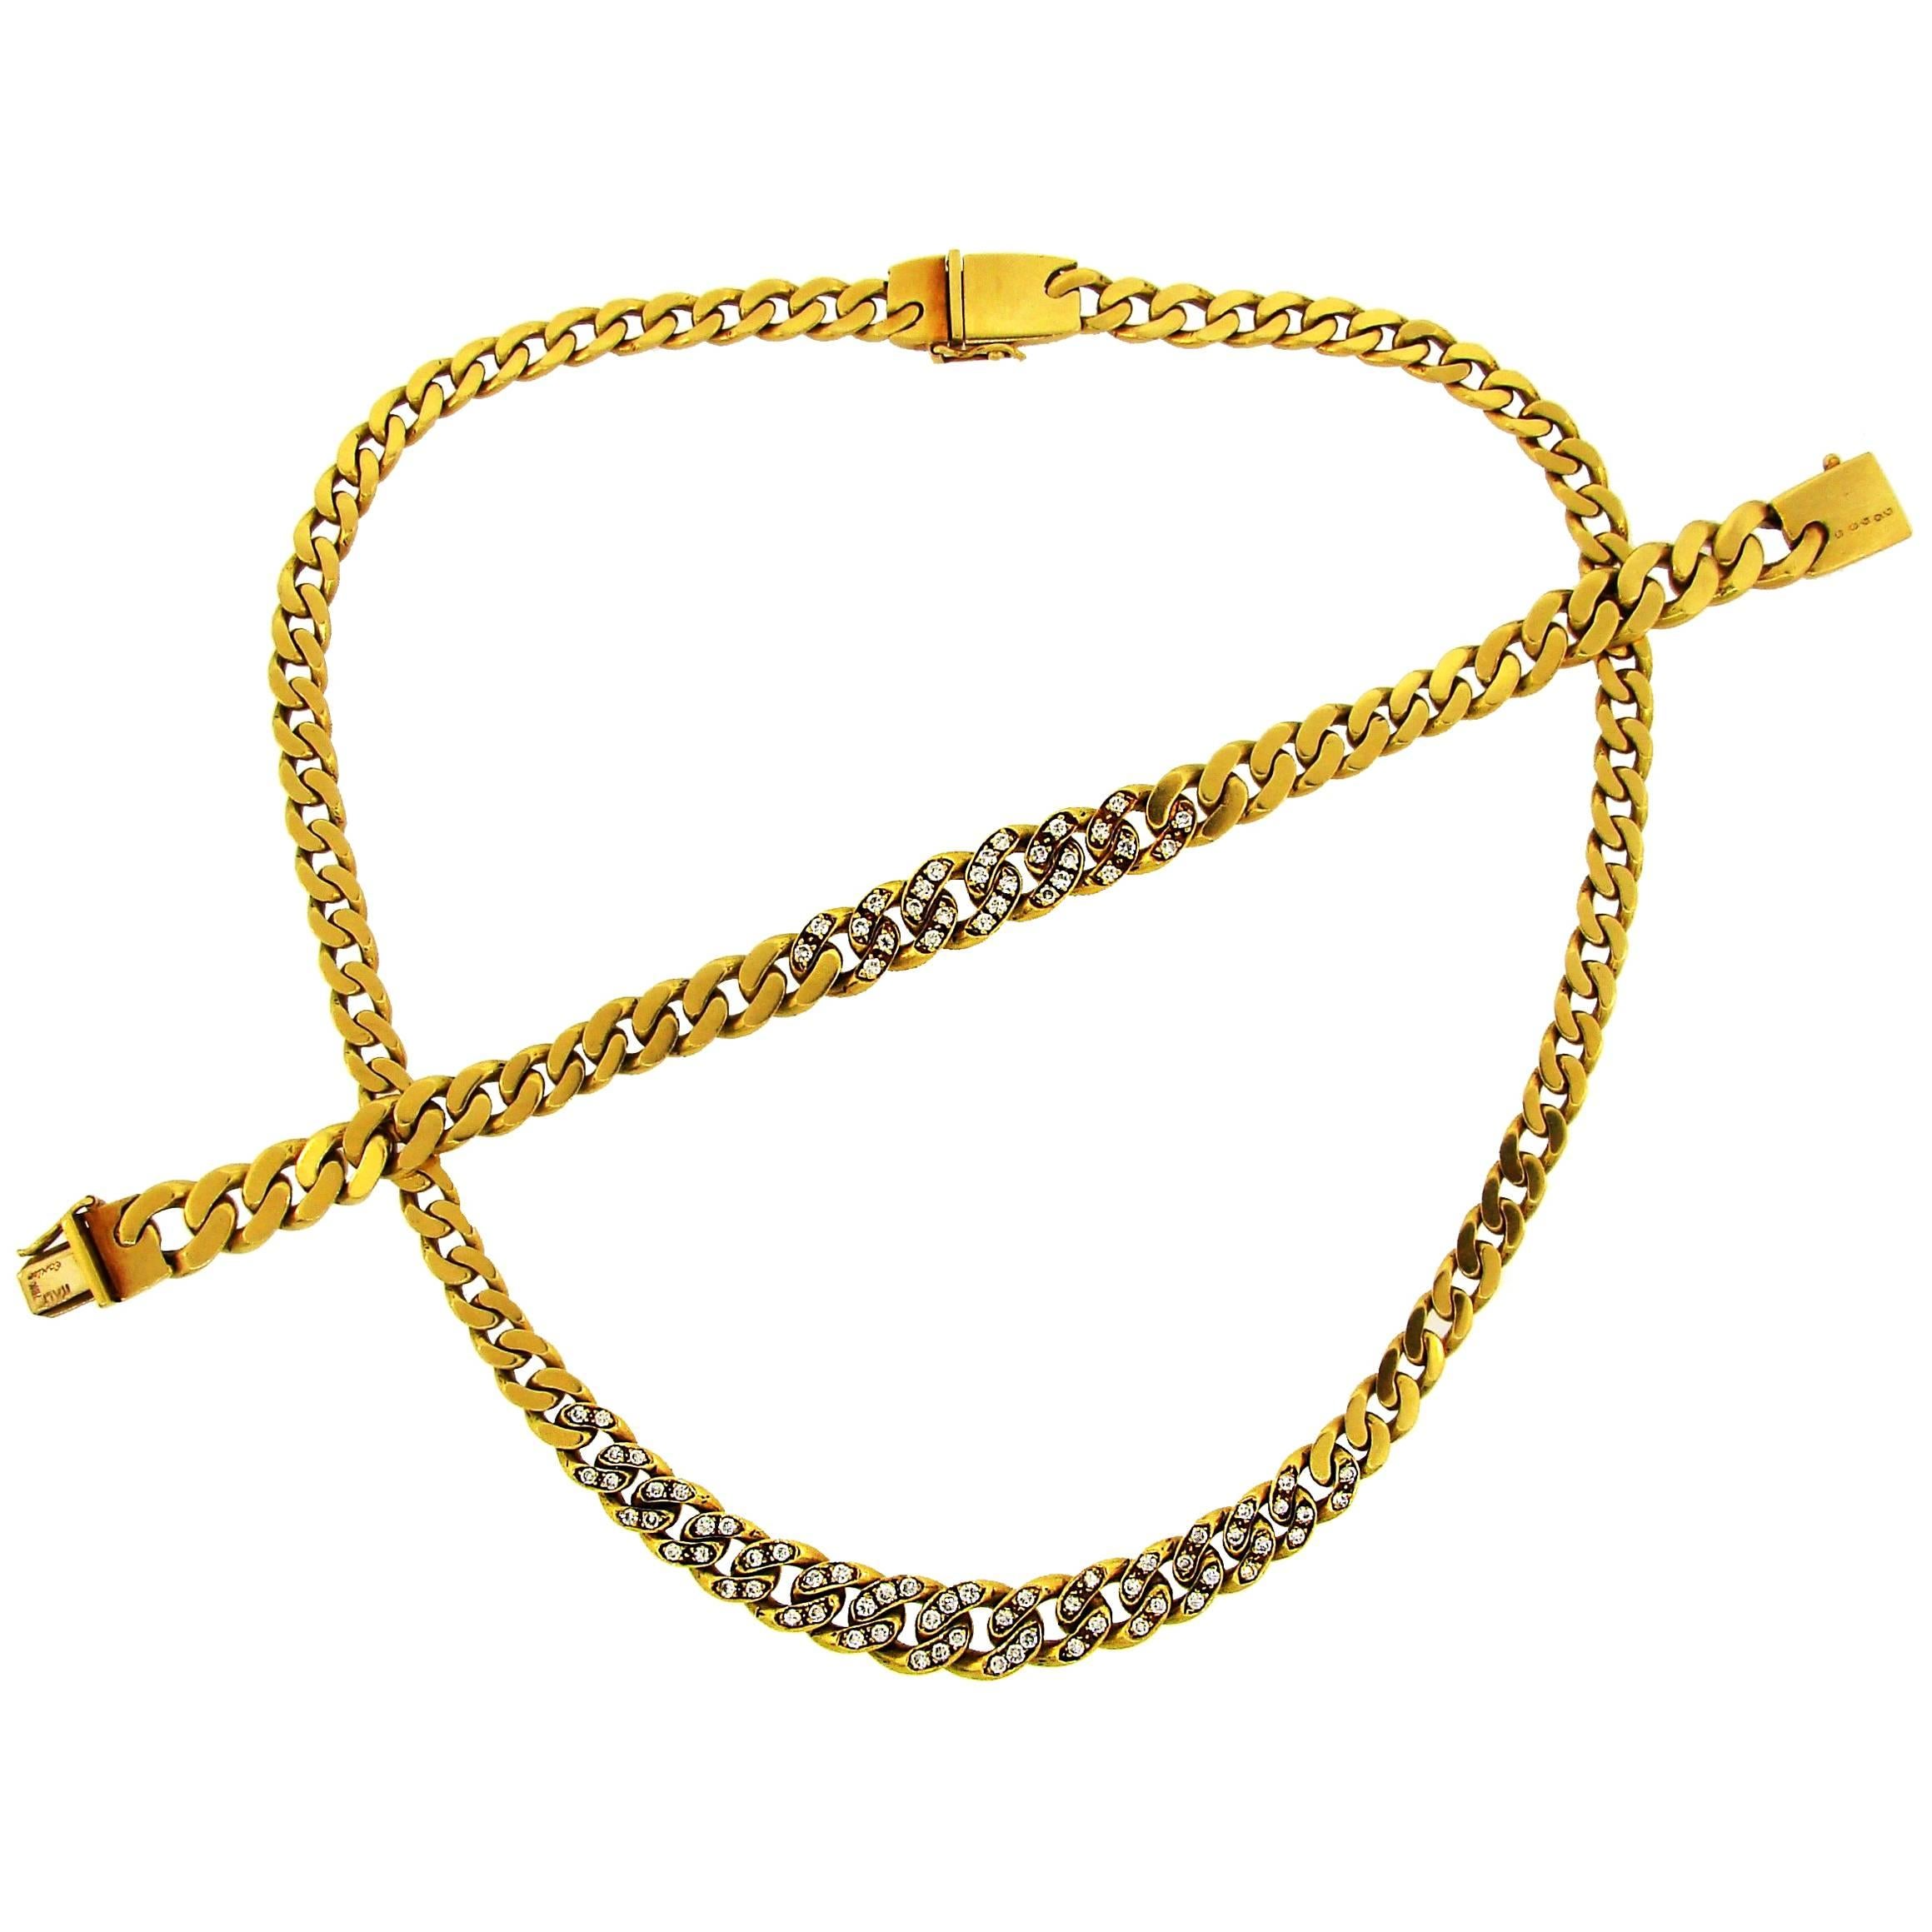 Cartier Diamond Yellow Gold Chain Bracelet and Necklace Set, 1970s